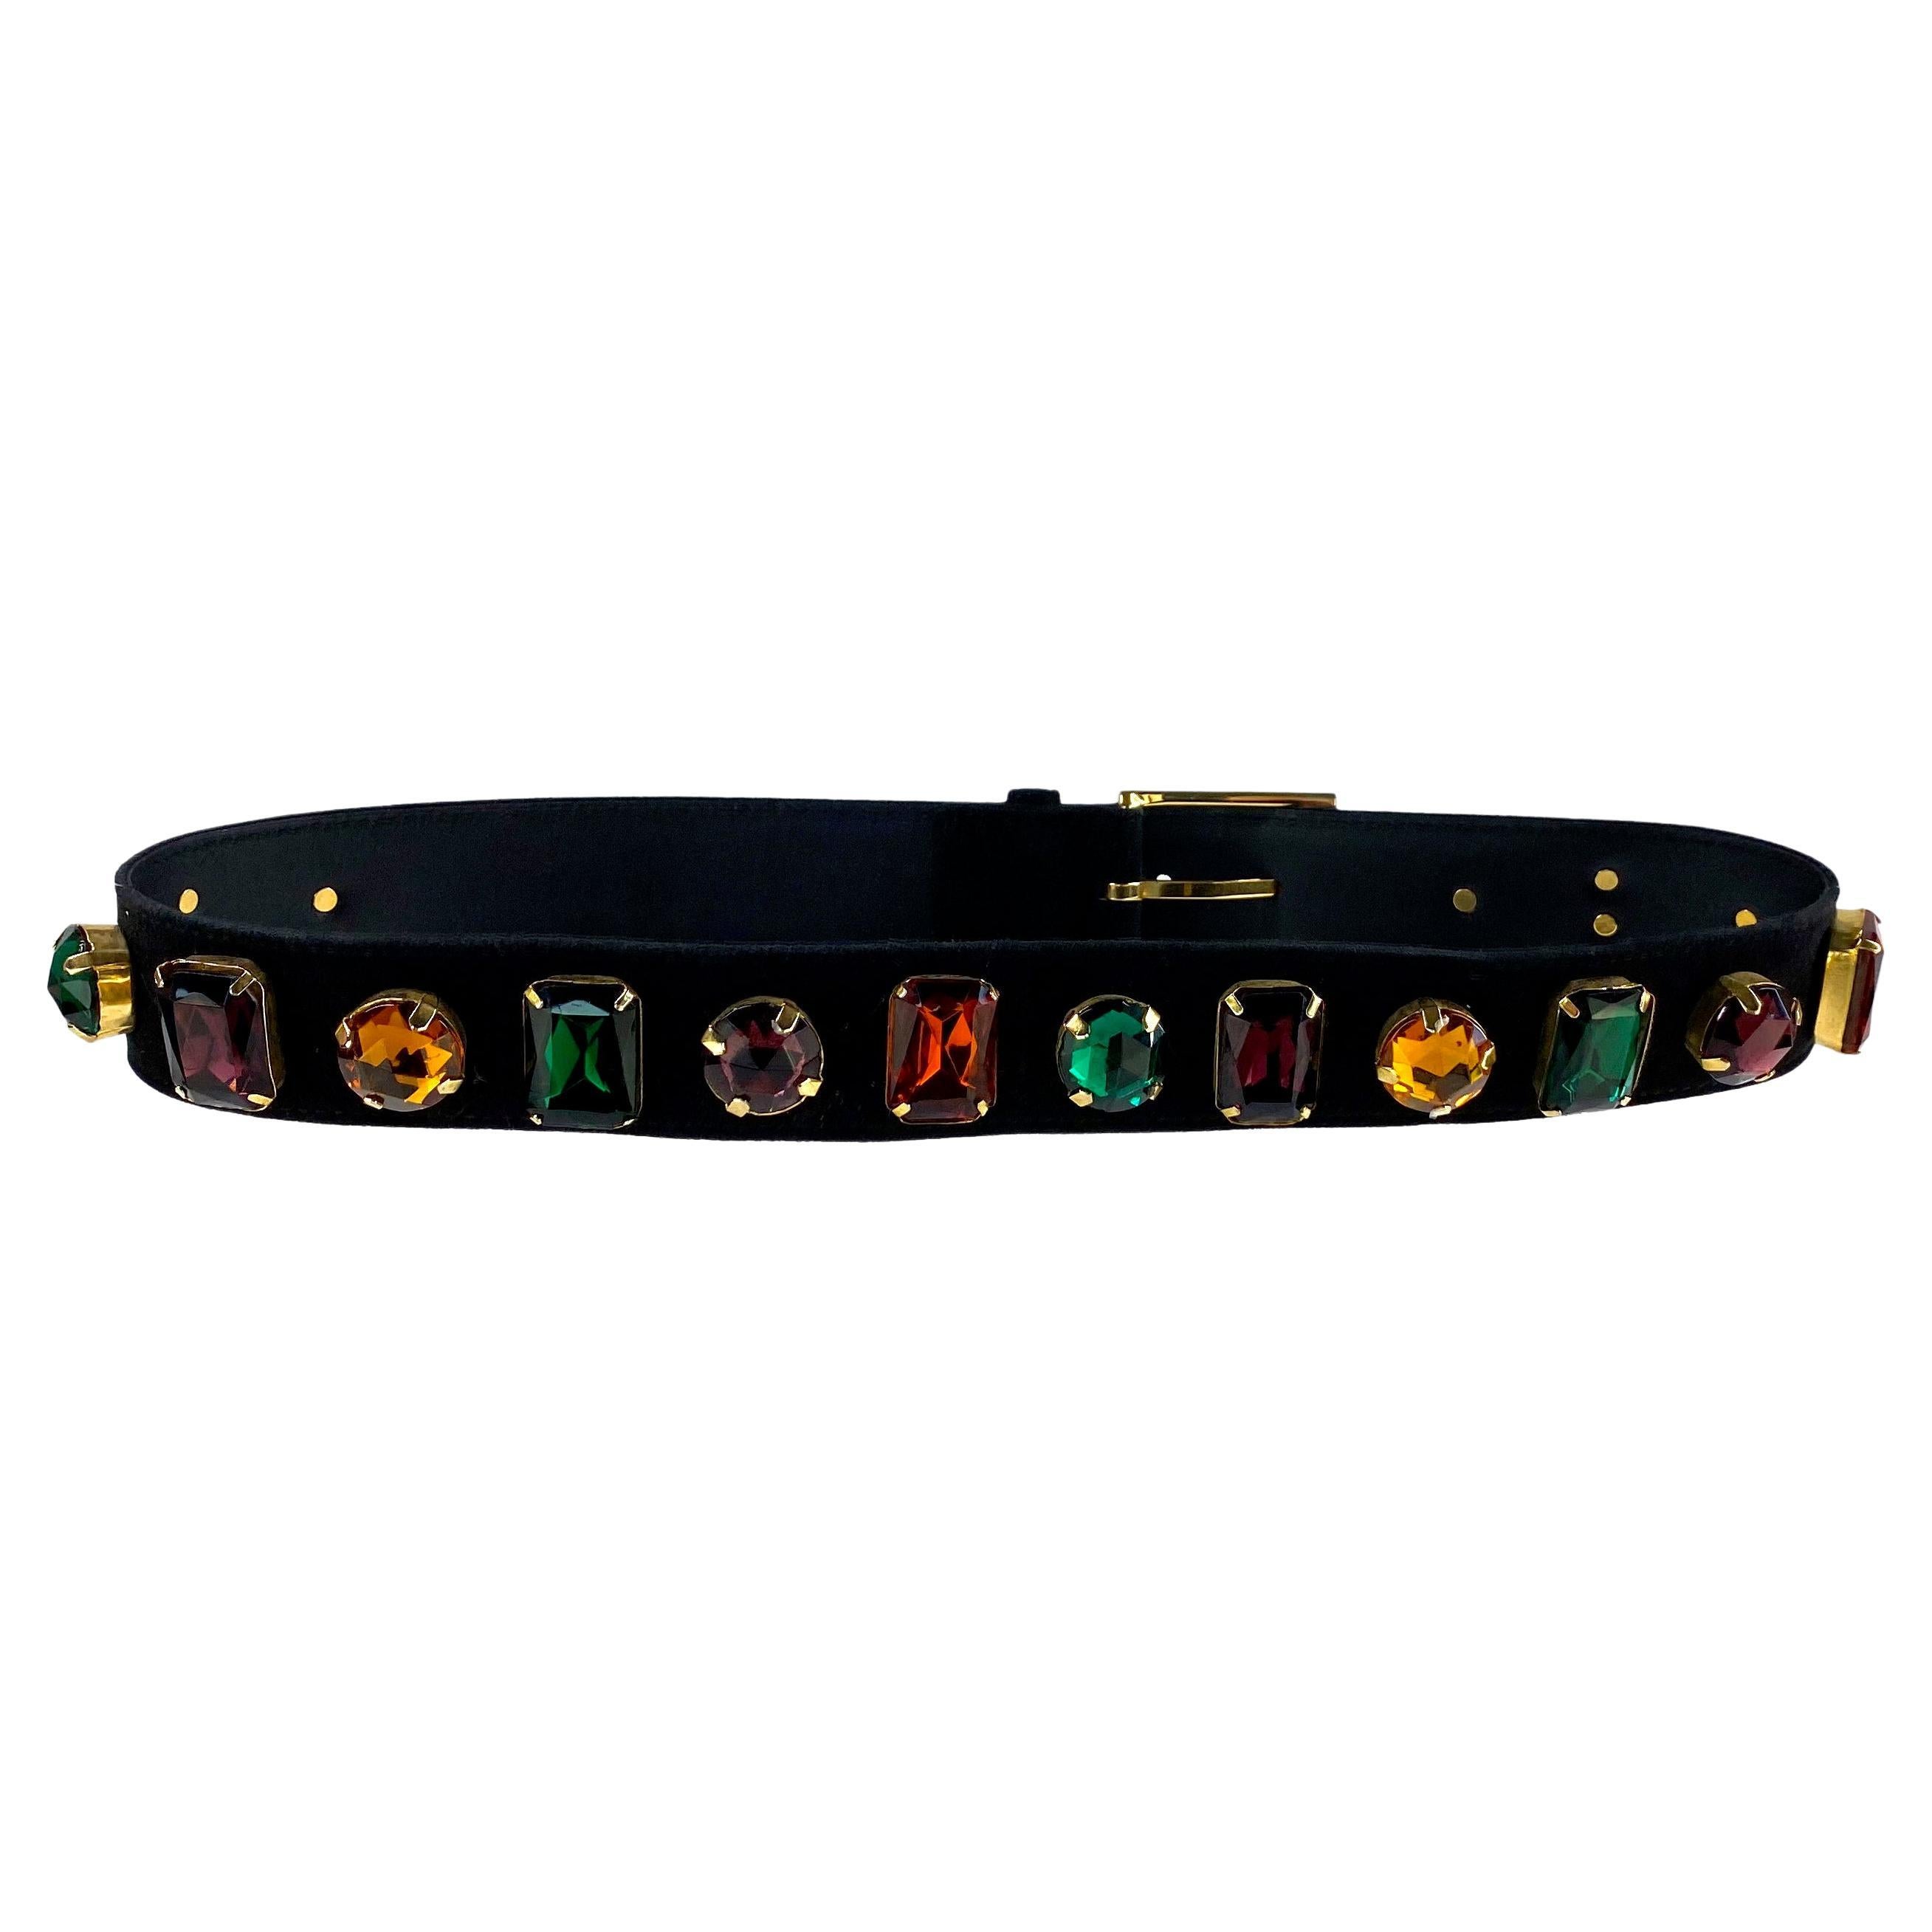 S/S 2000 Gianni Versace by Donatella Jewel Rhinestone Suede Belt Mens Documented For Sale